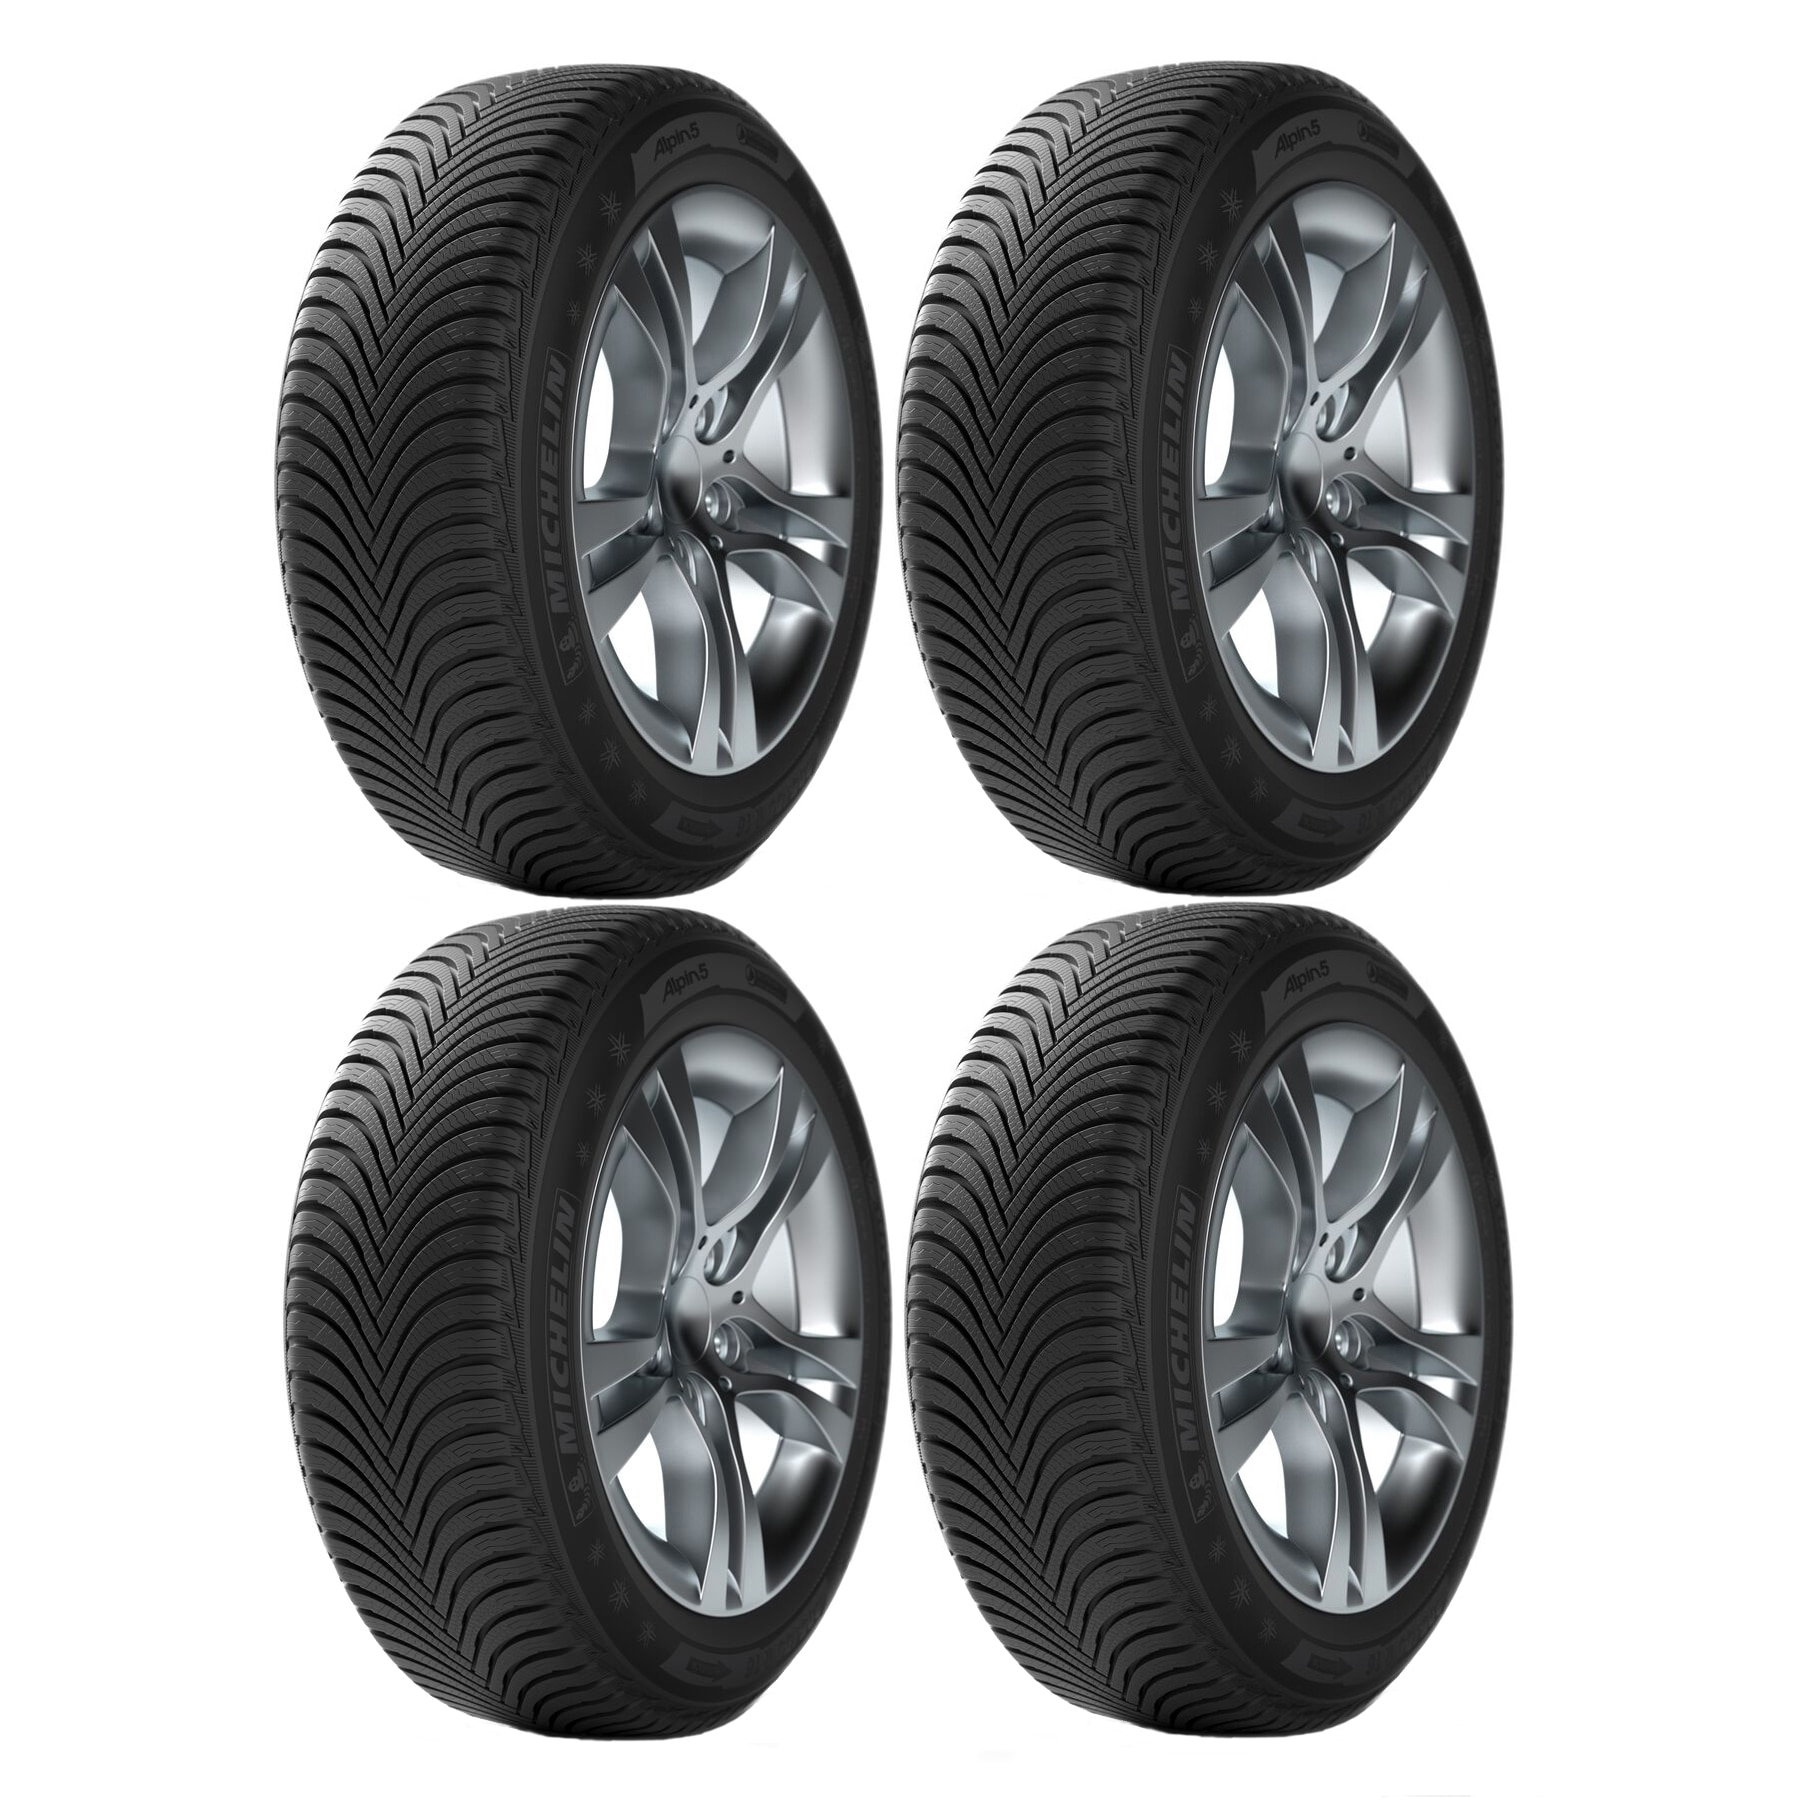 anvelope iarna Michelin 205/55 R16 91T - eMAG.ro